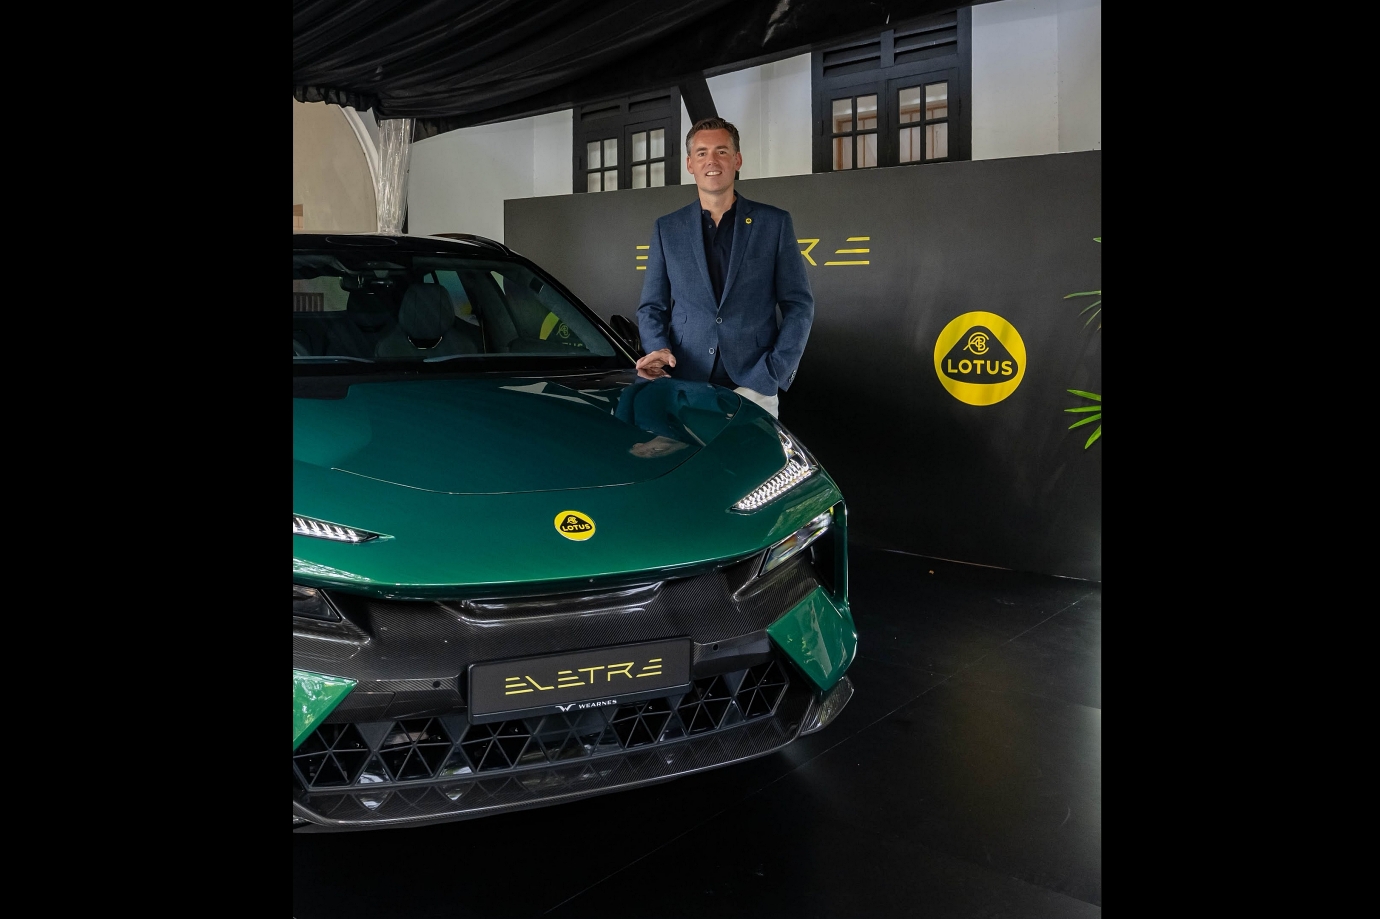 lotus eletre, wearnes automotive, dan balmer, katya, reuben tan, emira, lotus, wearnes automotive, motorsports, ev, electric vehicles, eletre, lotus eletre, a chat with dan balmer, regional director, lotus asia-pacific and middle-east : relight my fire